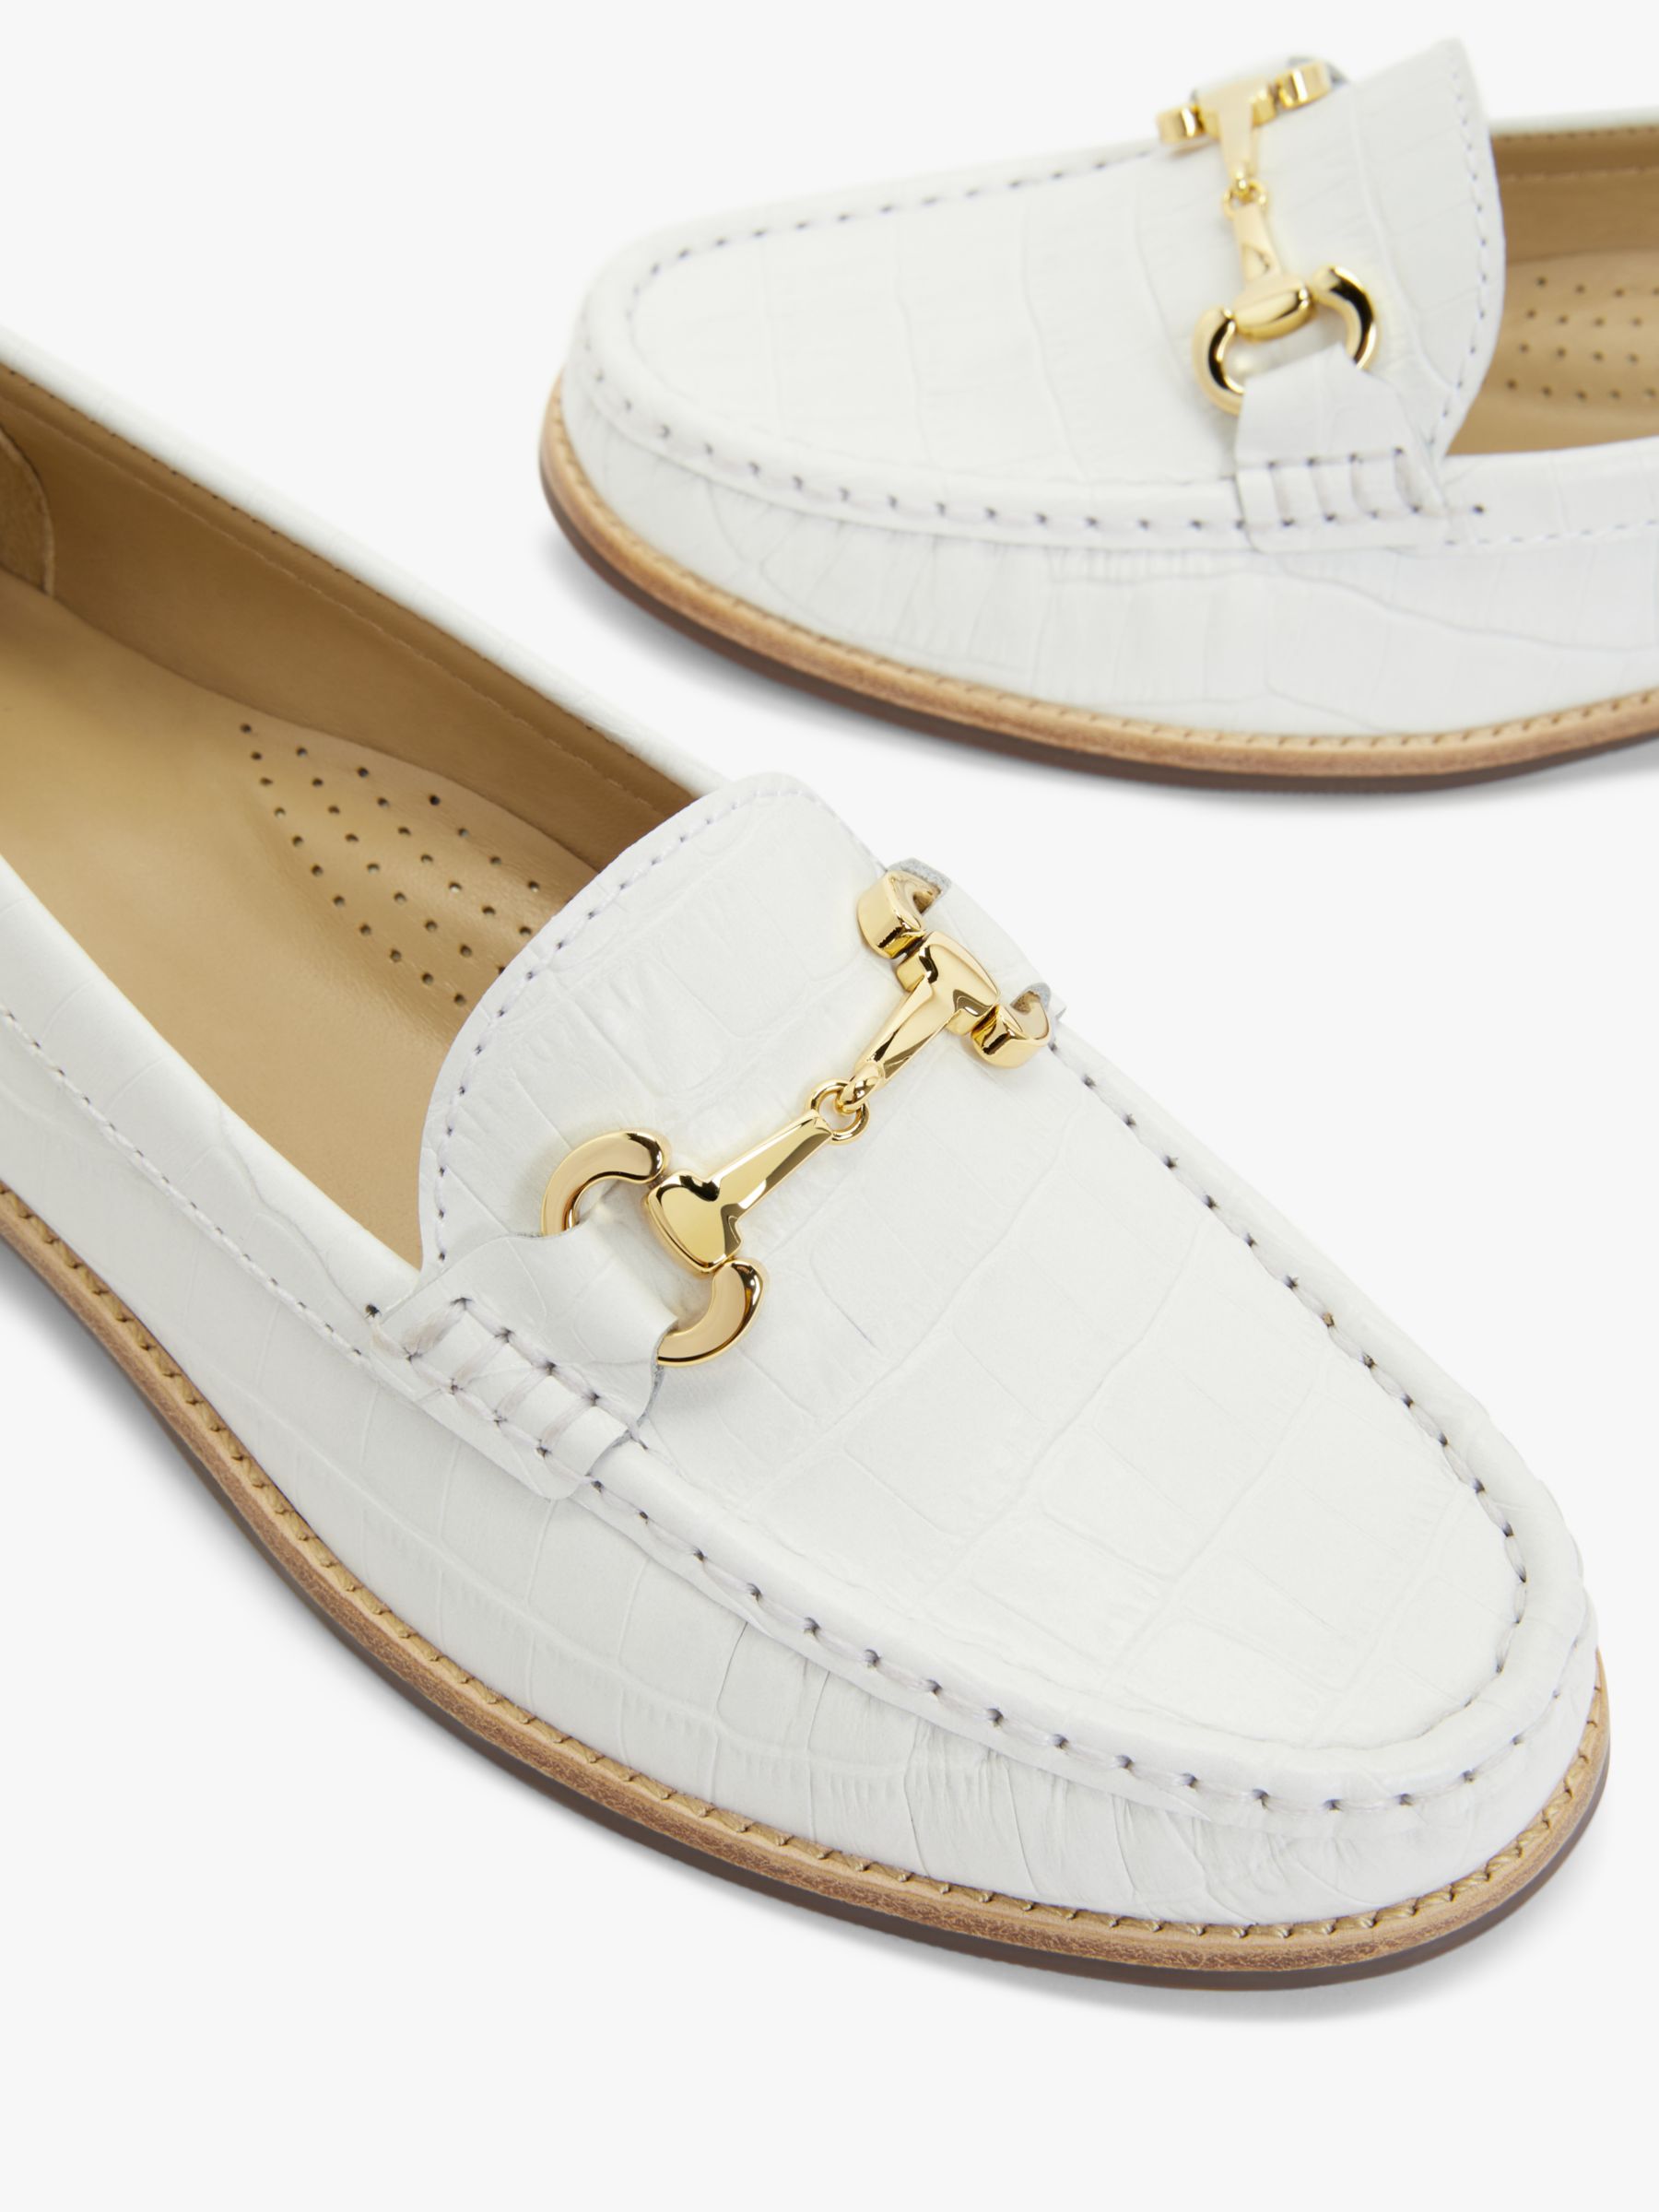 John Lewis August Leather Moccasins, White Croc, 3